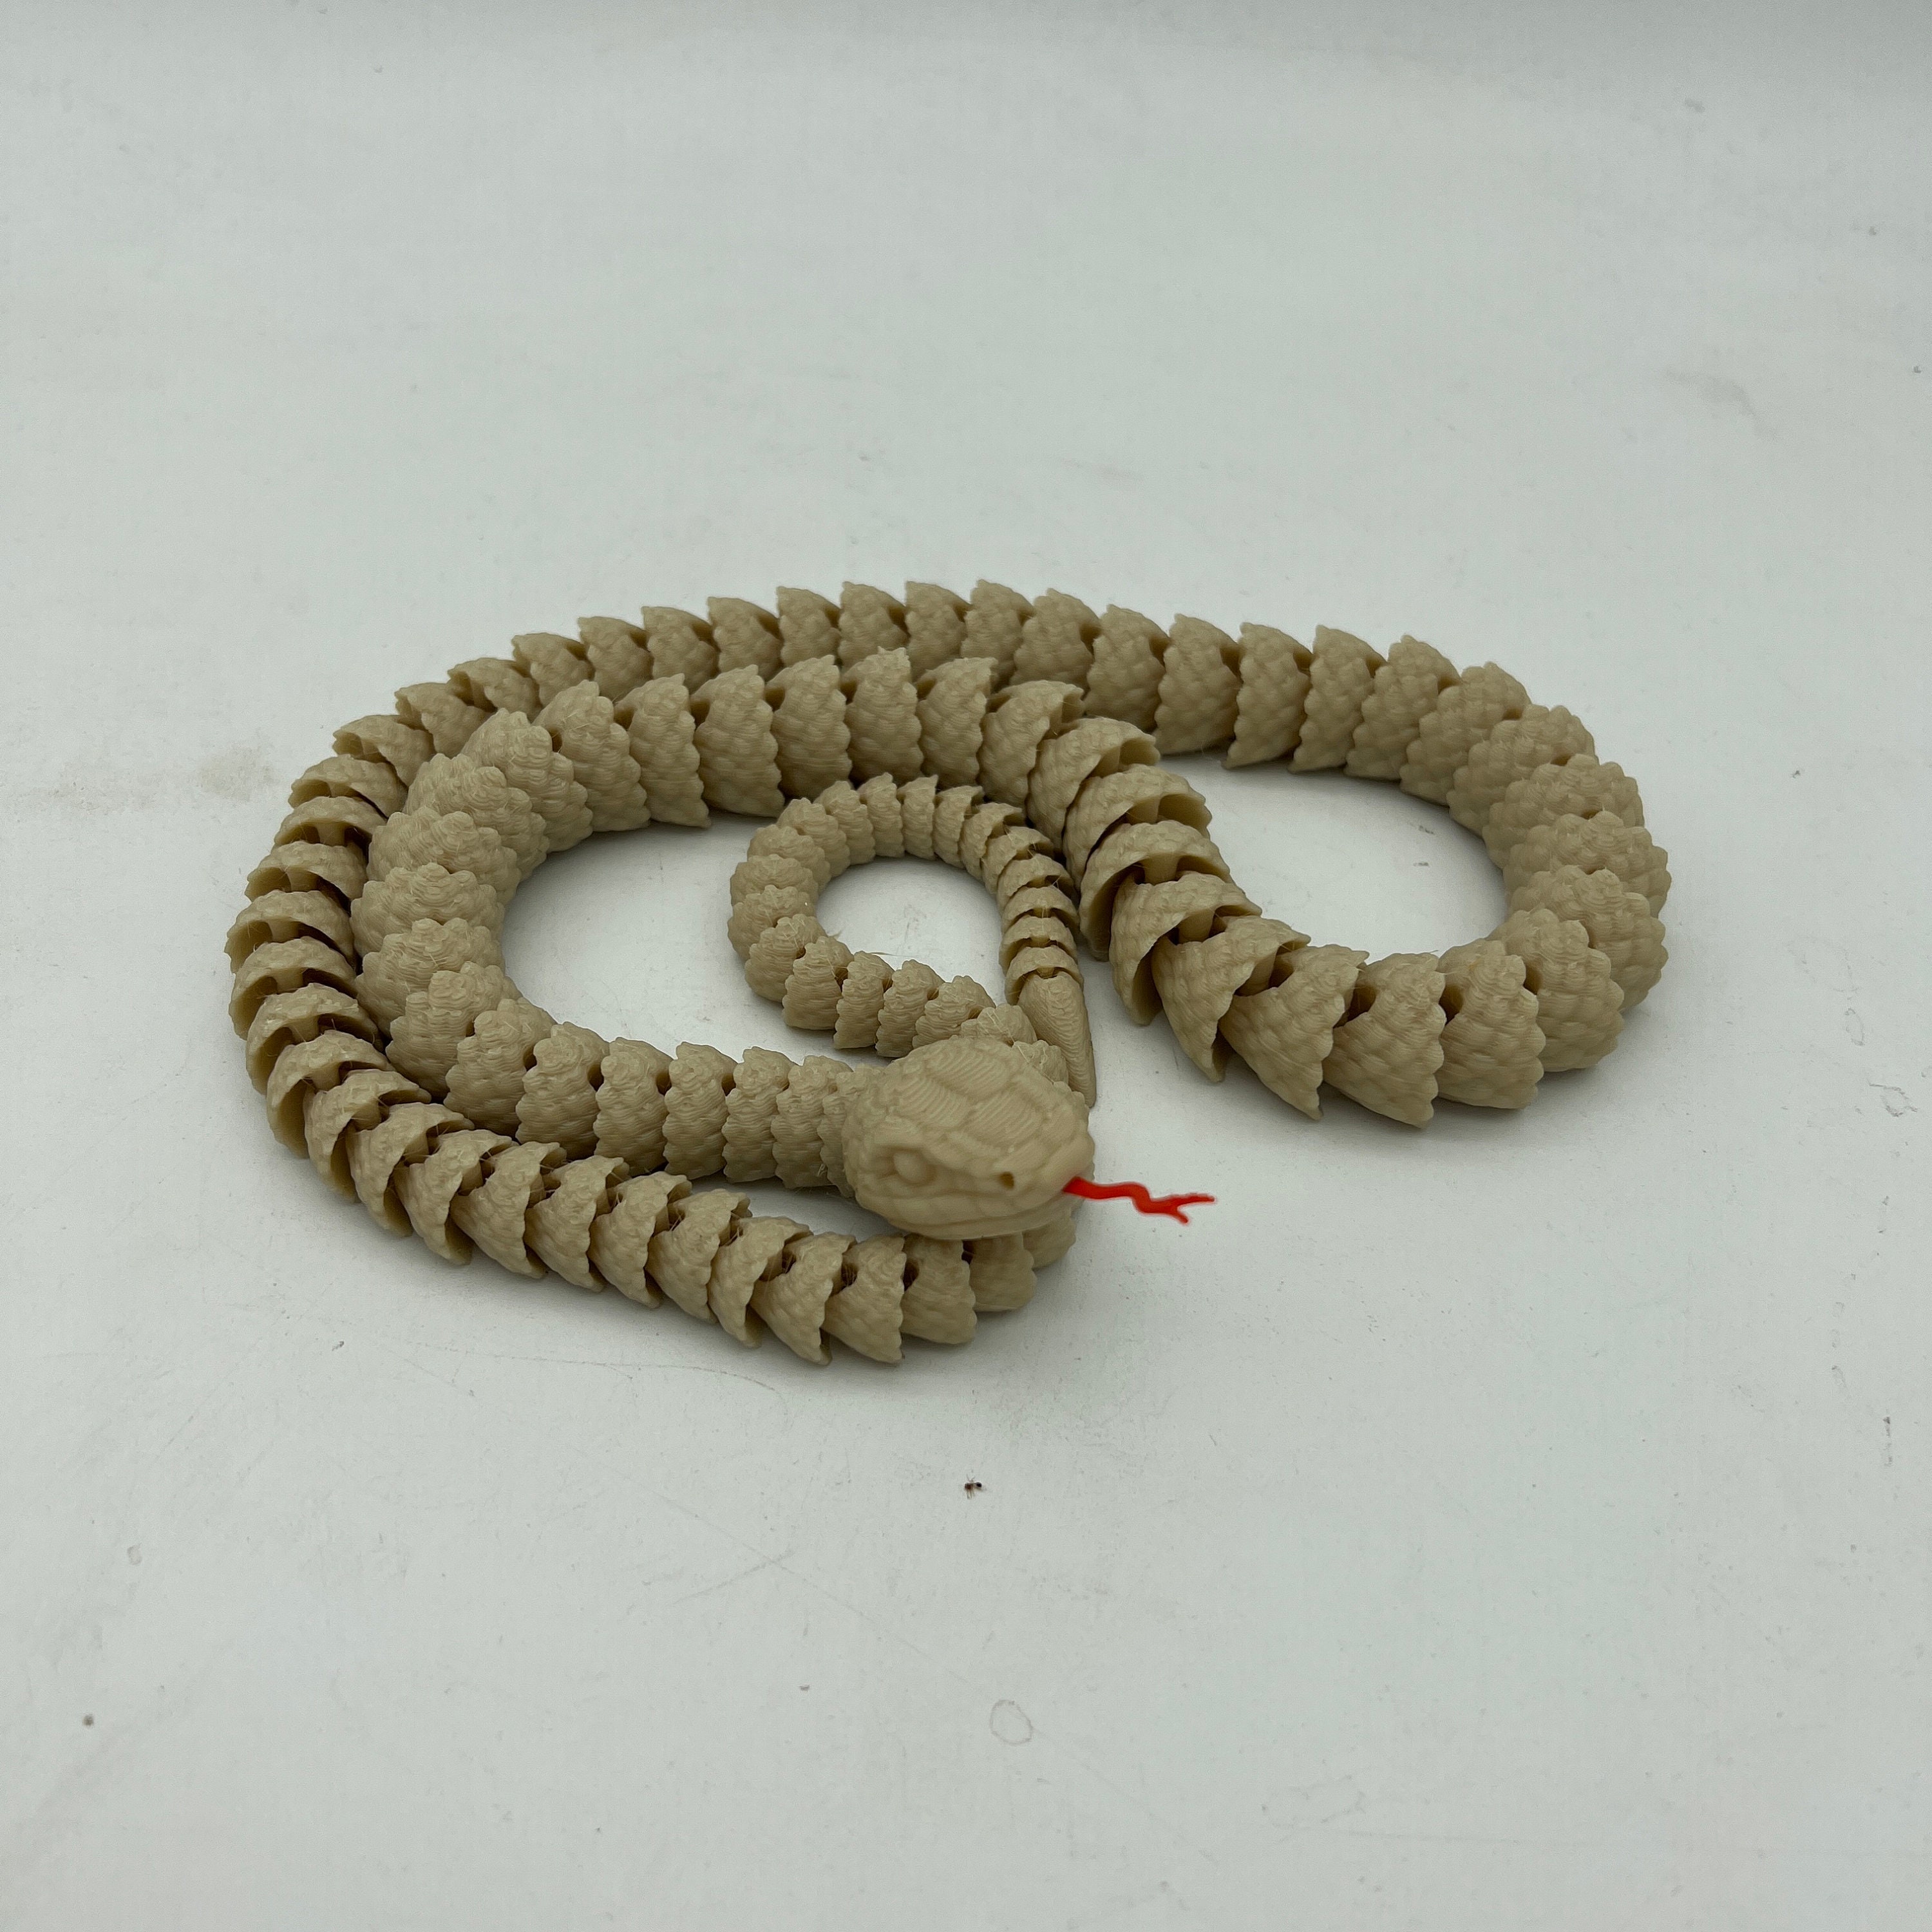 China 3D Printed Snake Statue With Scales Manufacturers, Suppliers, Factory  - Cheap 3D Printed Snake Statue With Scales Quote - FACFOX